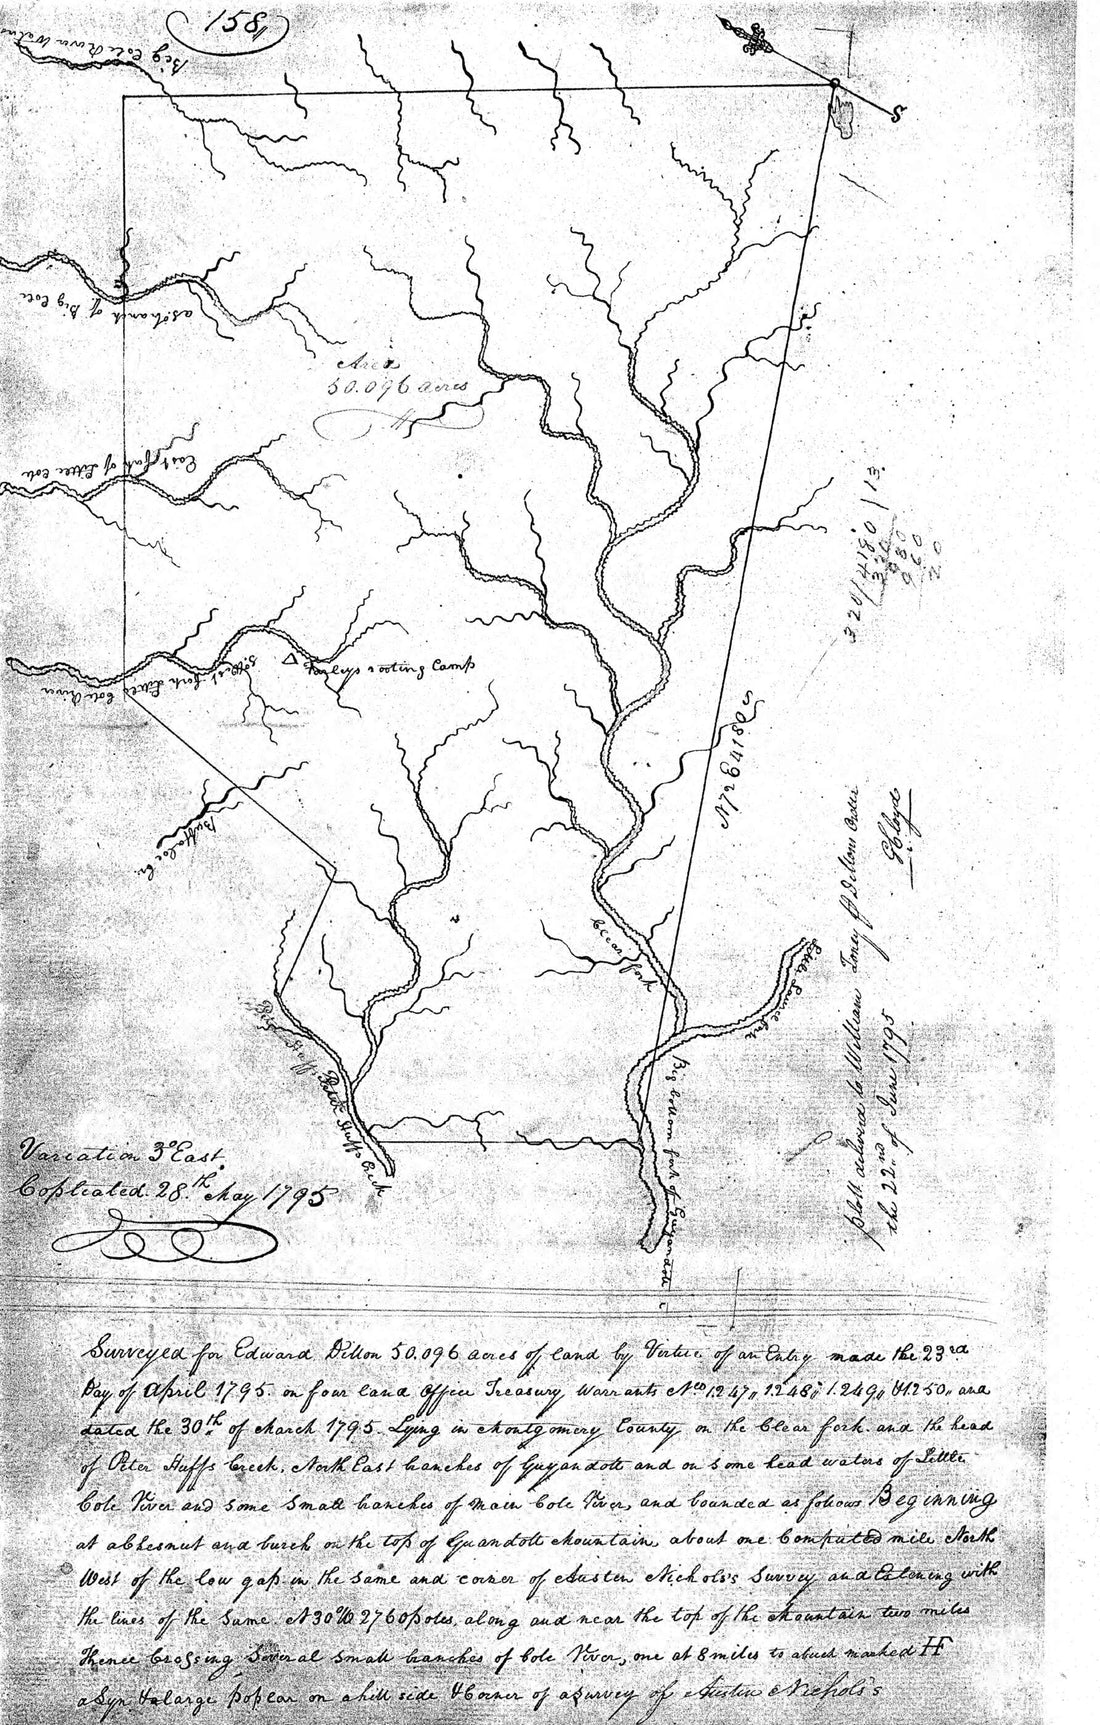 This old map of 18th Century Map Including the Headwaters of the Big Cole River from 03-30 was created by  in 03-30